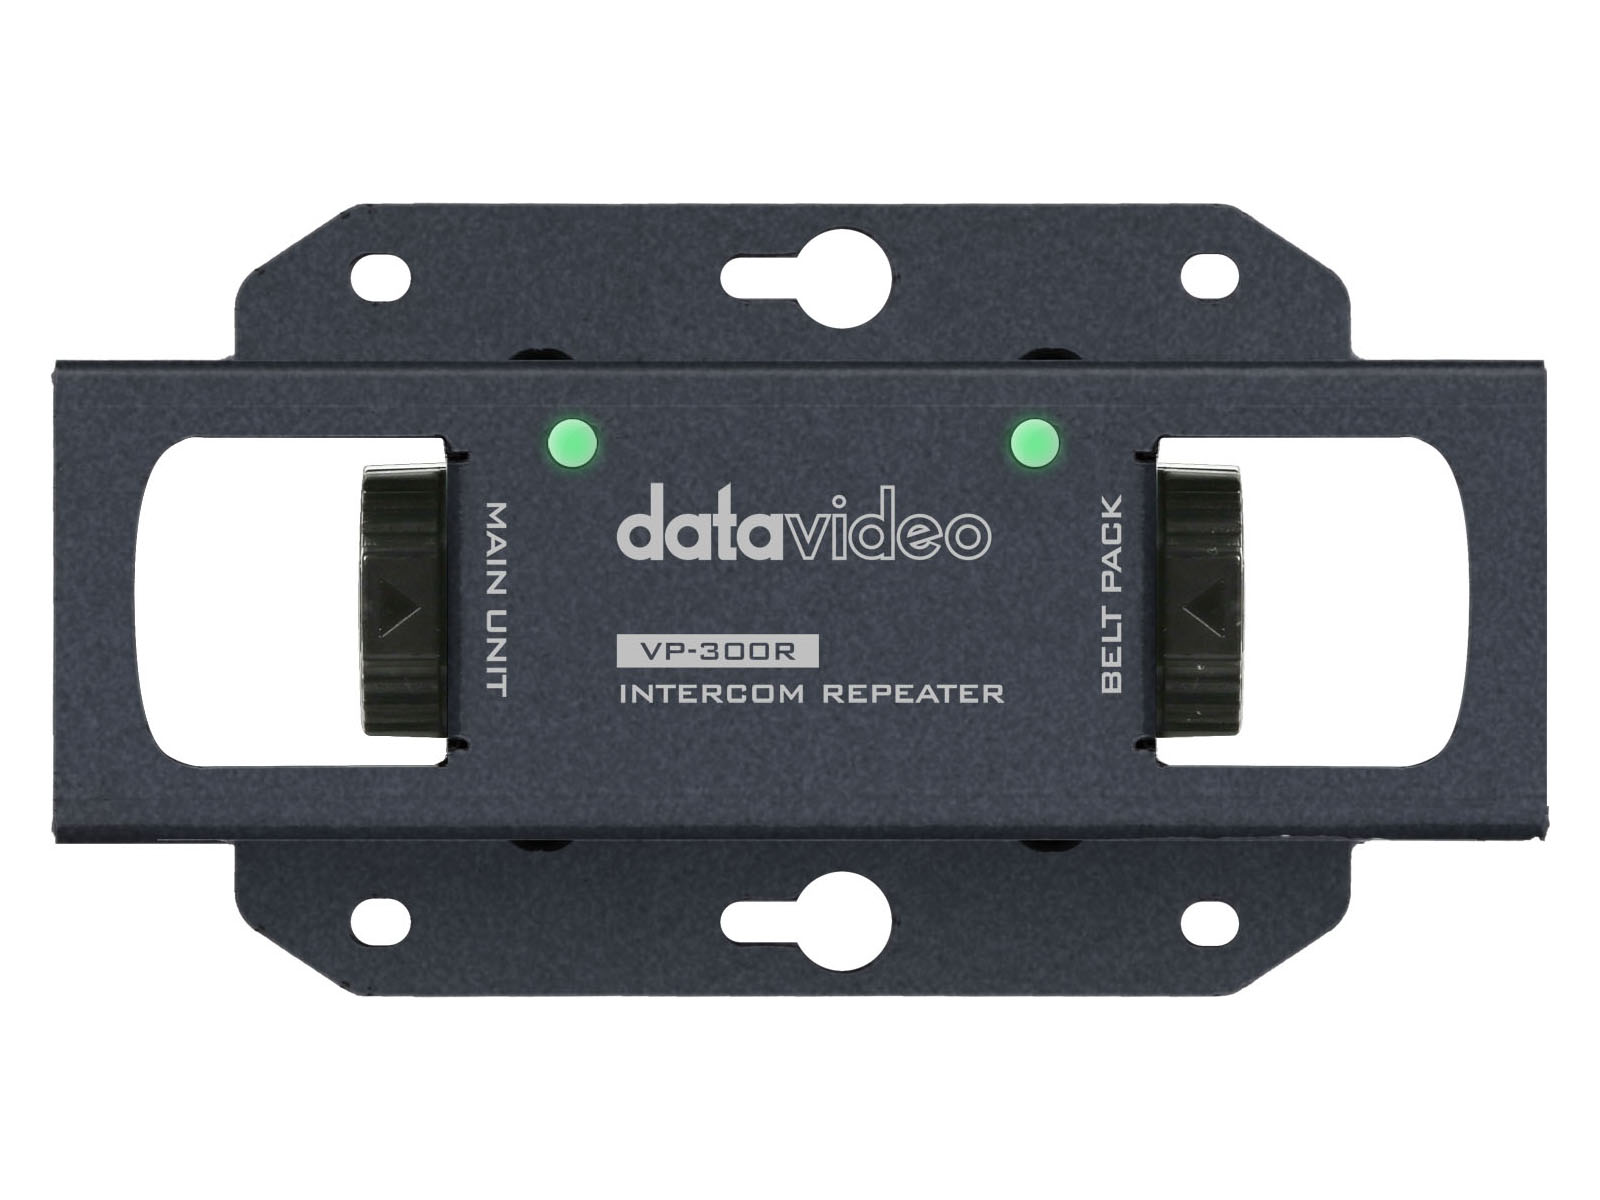 Datavideo VP-300R Repeater to Extend the ITC-300 CAT-6 cables up to 200m/600ft